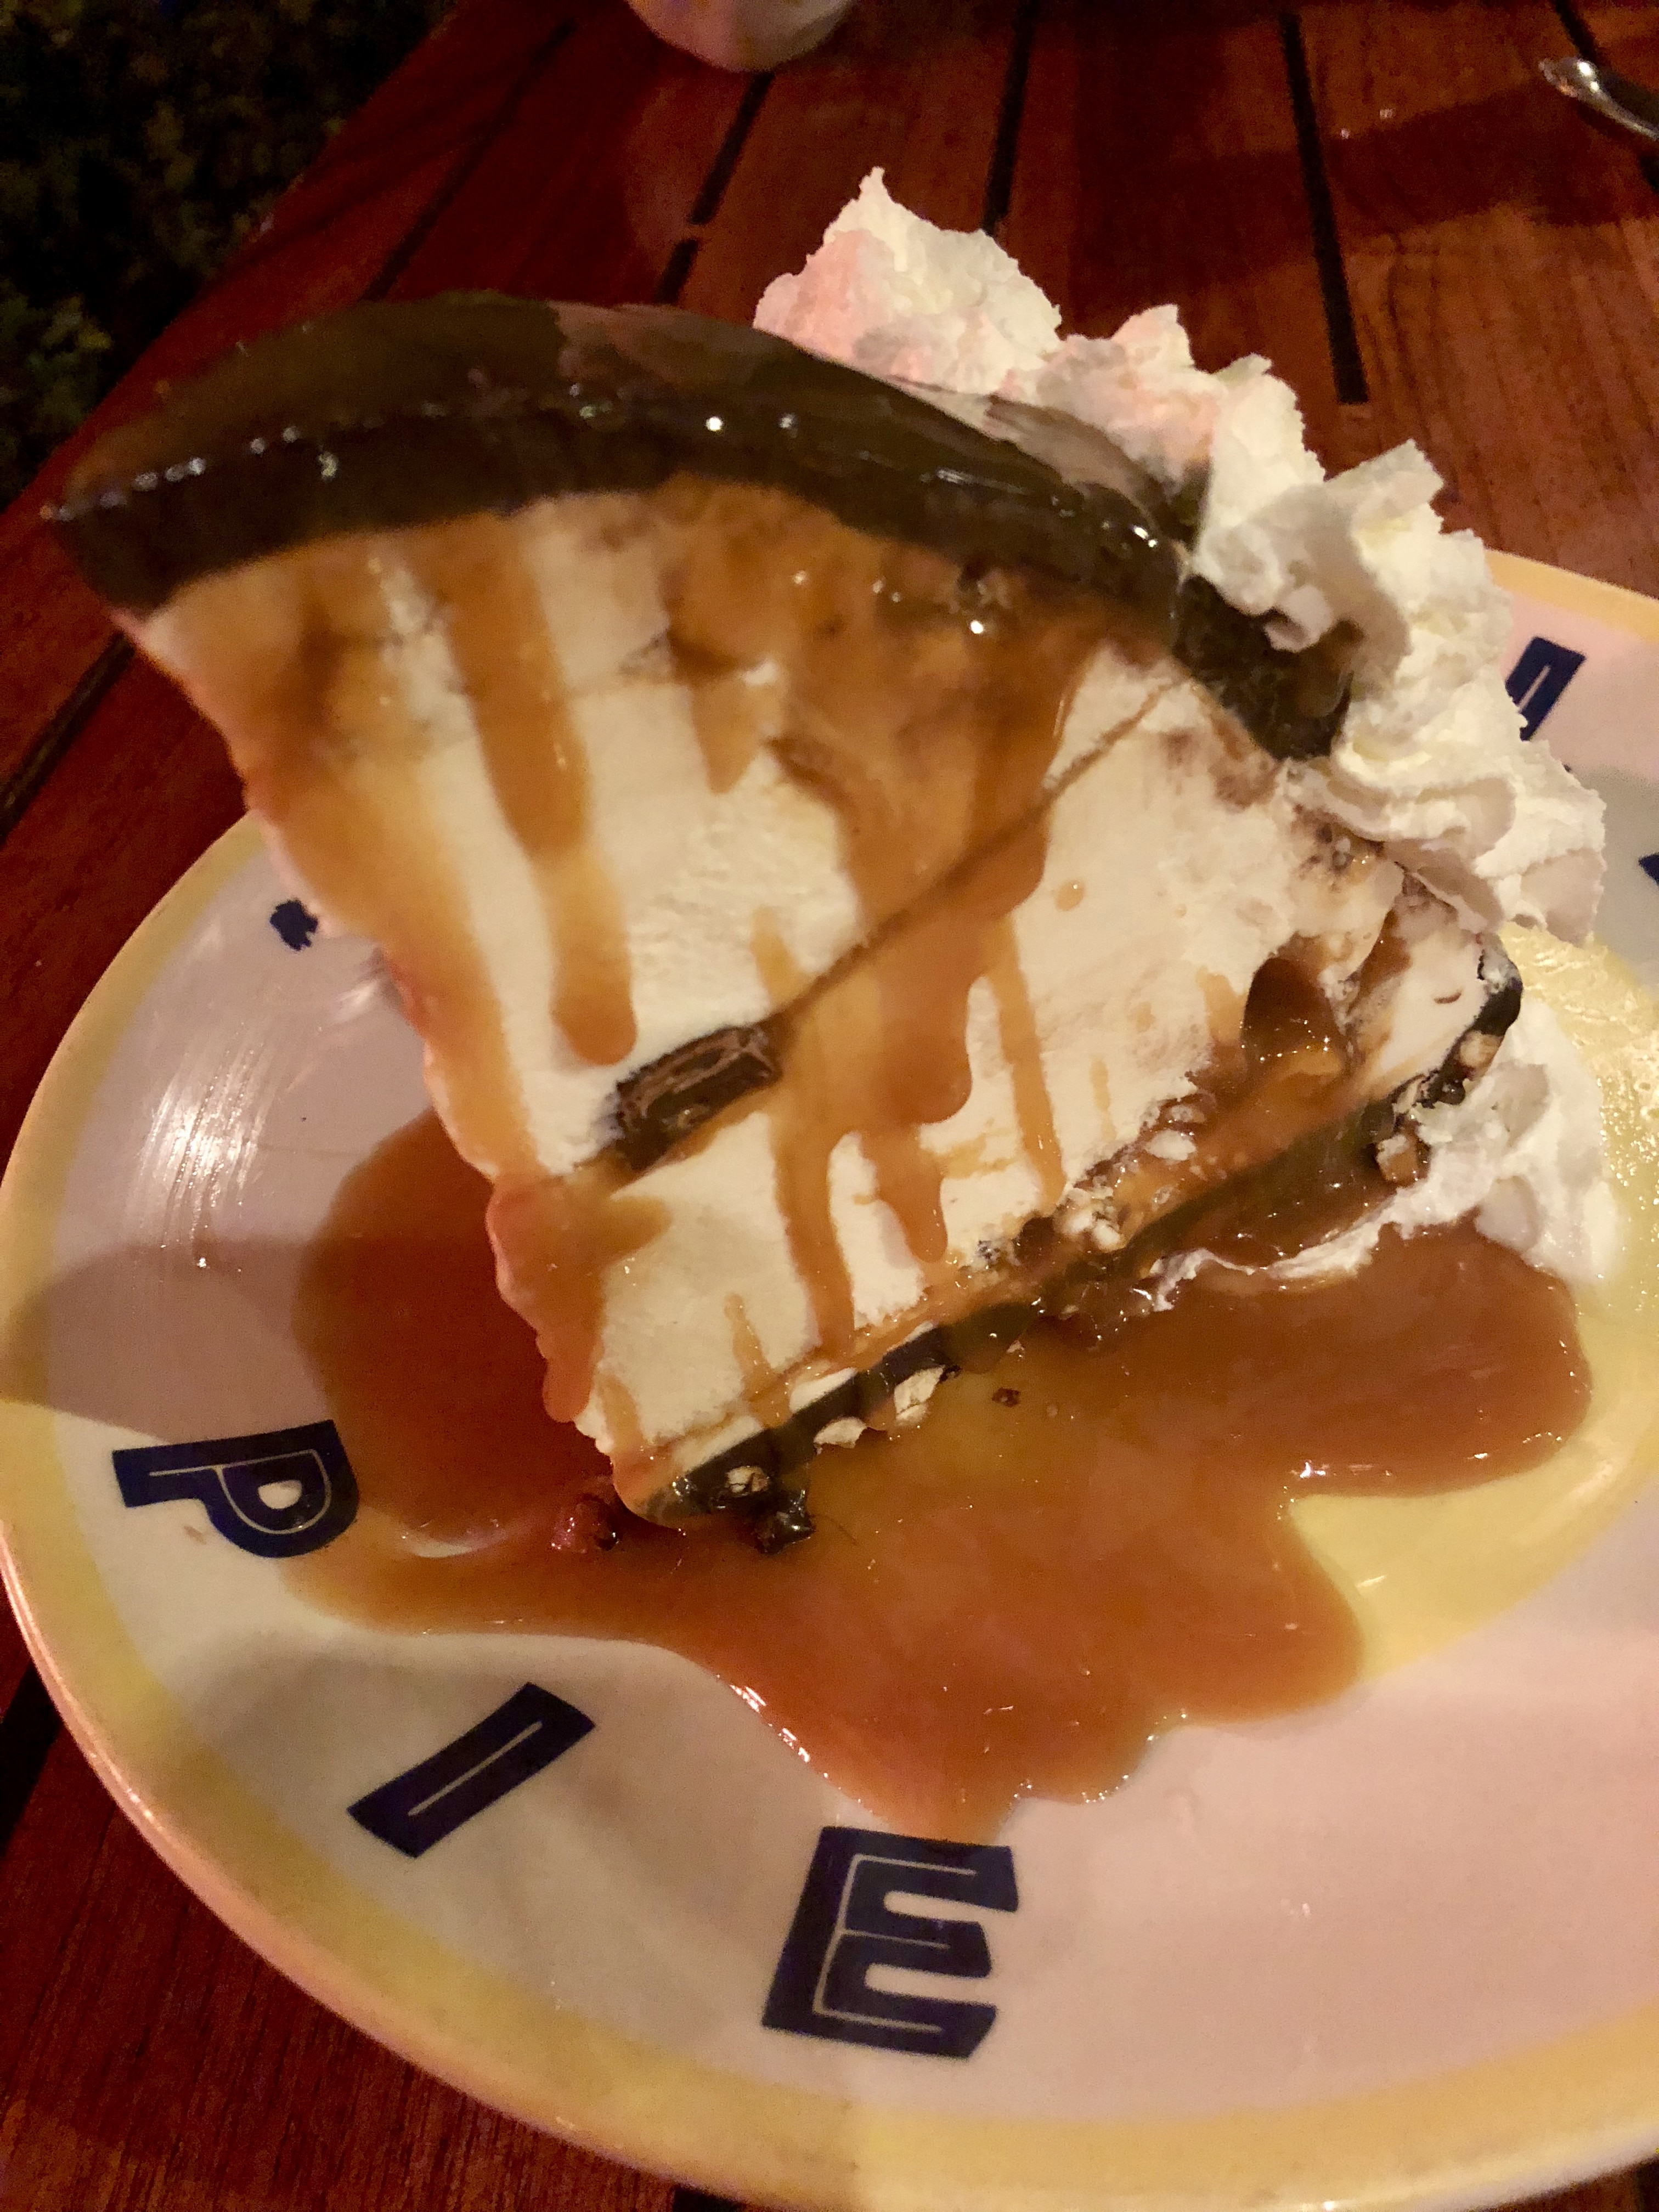 Hula Pie Variation with Pretzels and Caramel Sauce